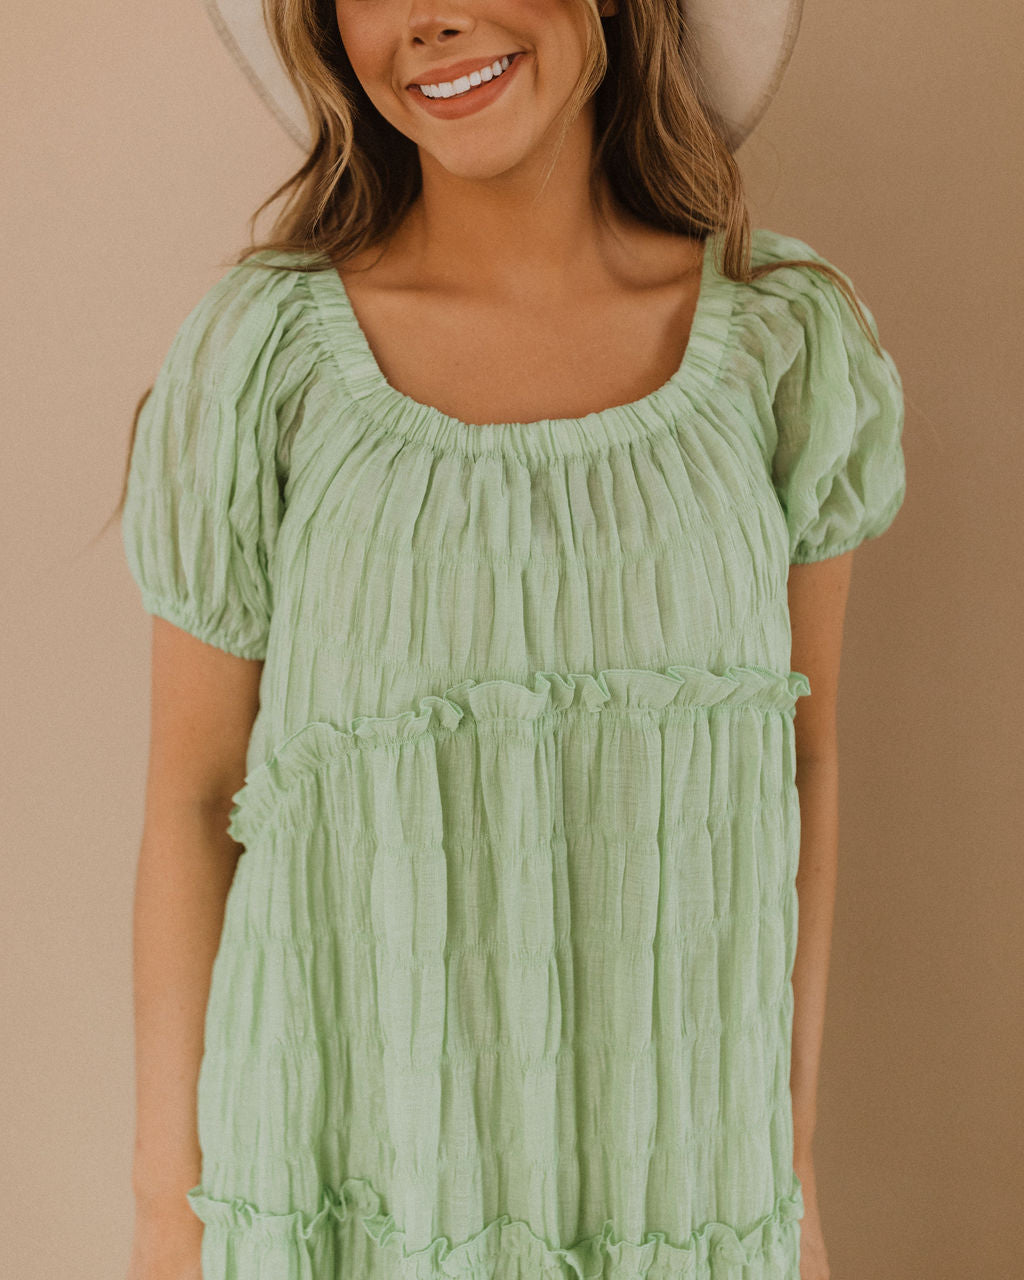 THE LOOK INTO THE SUN MAXI DRESS IN LIME SHERBET